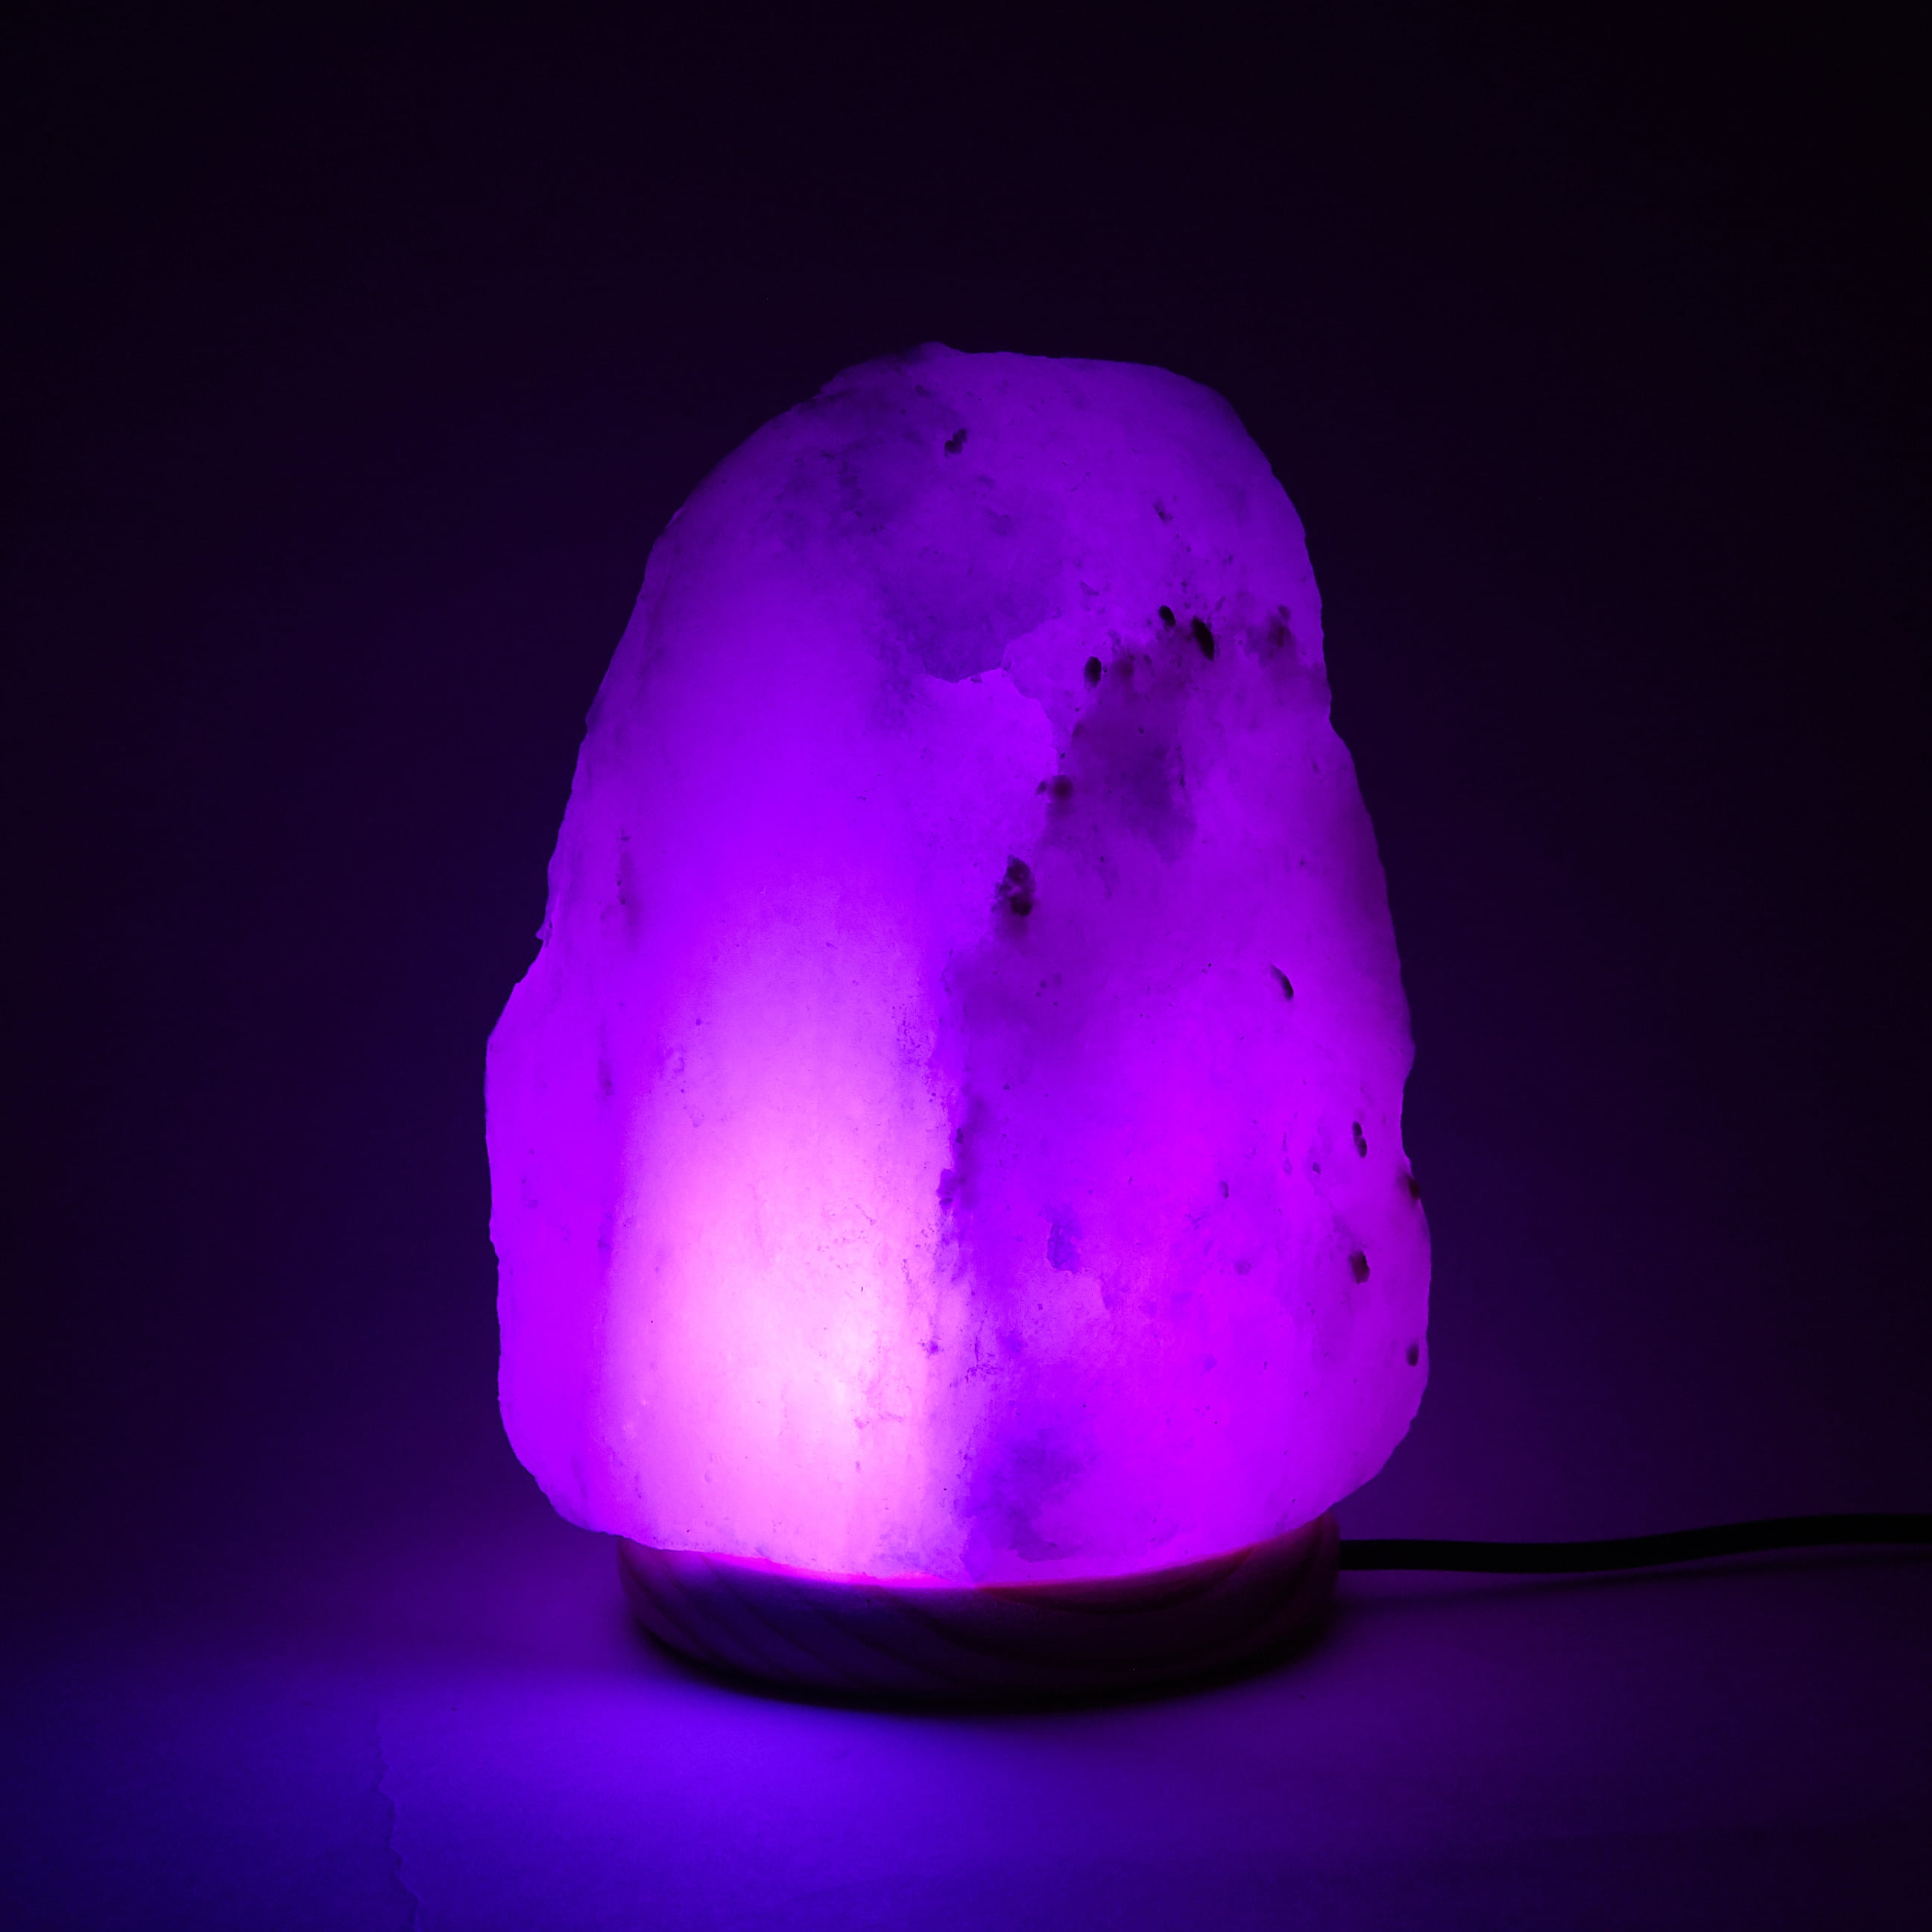 Himalayan Changing LED Lamp White with USB Cord, Shop Salt Color